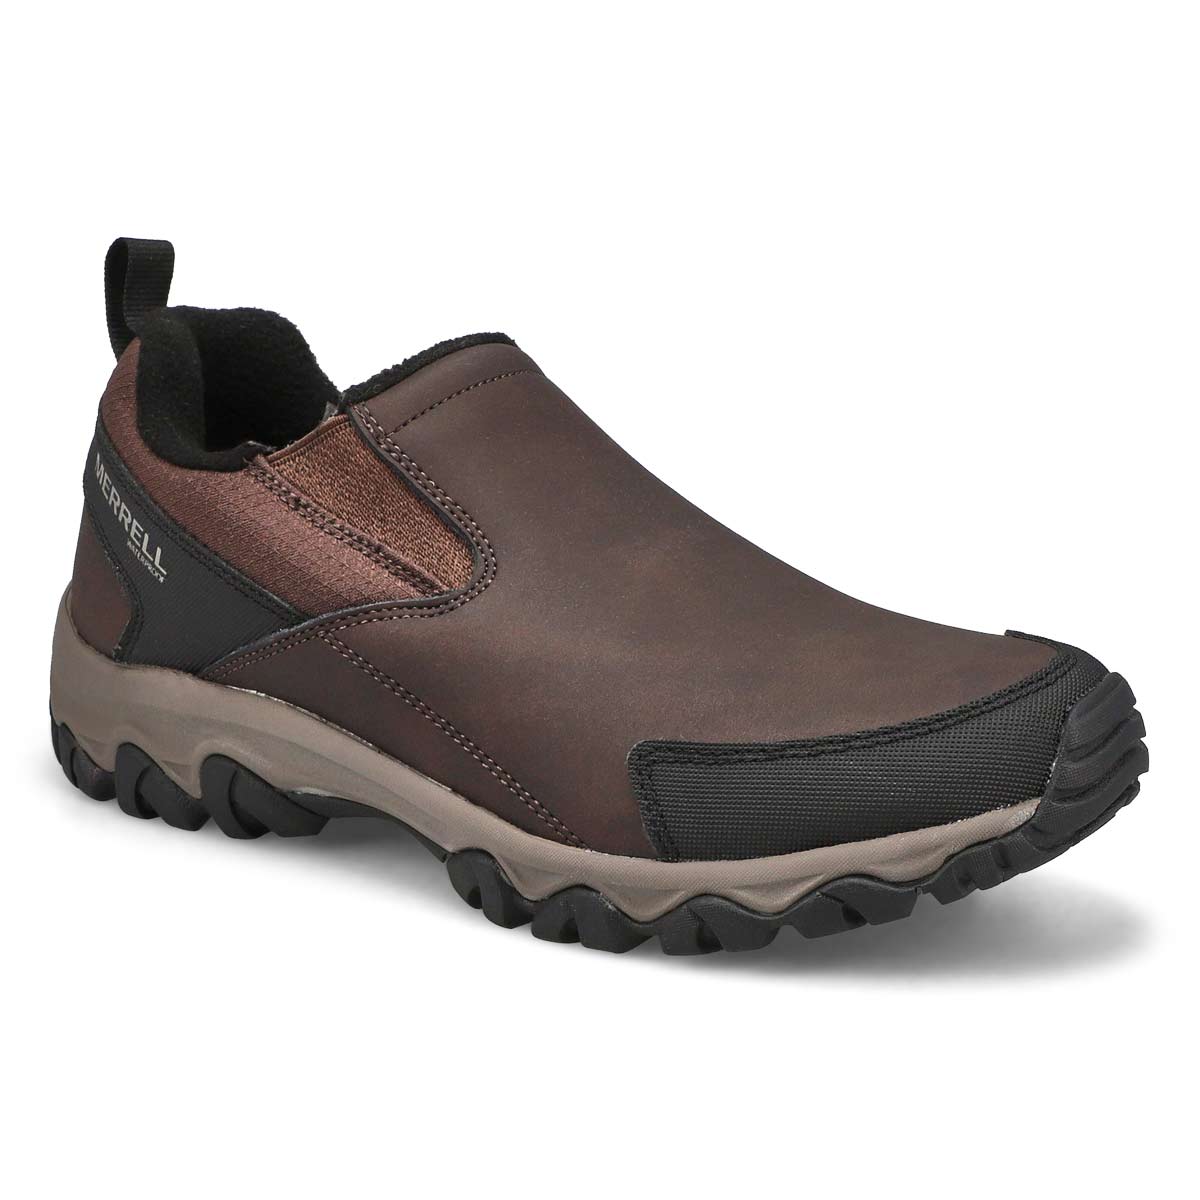 Chaussure imperméable THERMO AKITA MOC, expresso, hommes